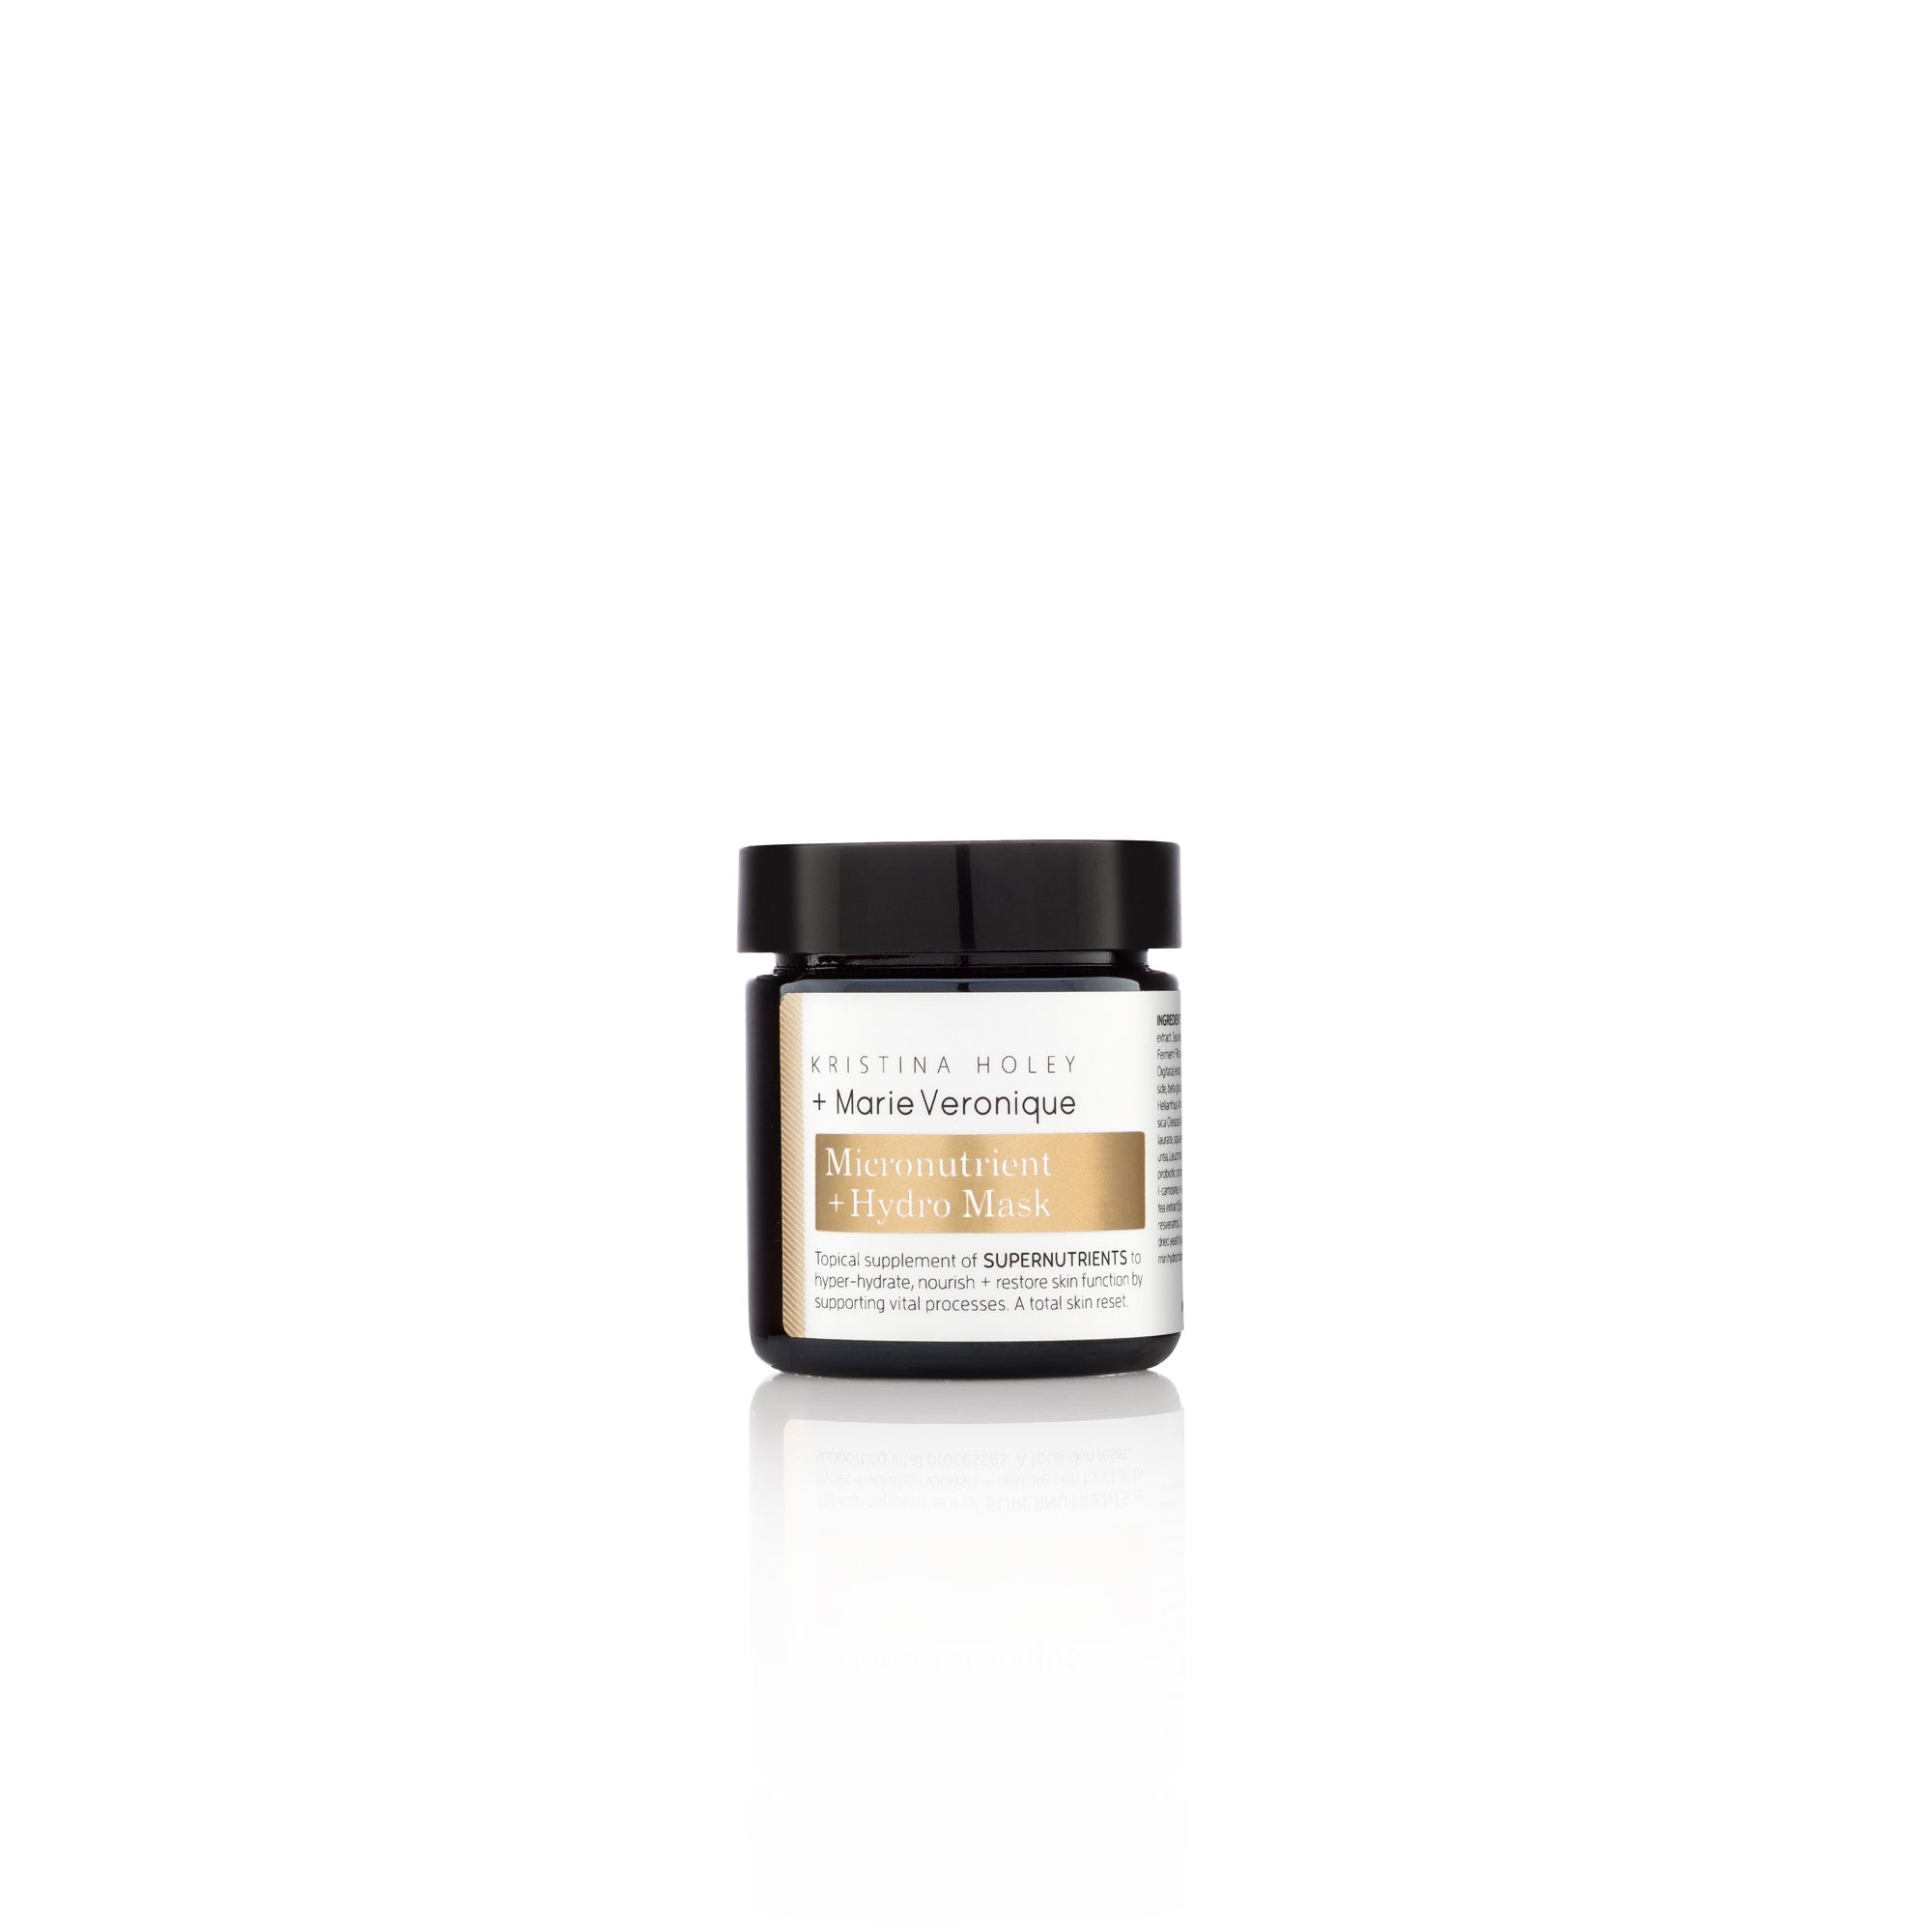 Marie Veronique Micronutrient + Hydro Mask 1.7oz / 50ml. Topical supplement of SUPERNUTRIENTS to hyper-hydrate, nourish + restore skin function by supporting vital processes. A total skin reset. Microbiome-friendly / Fragrance+Essential Oil free